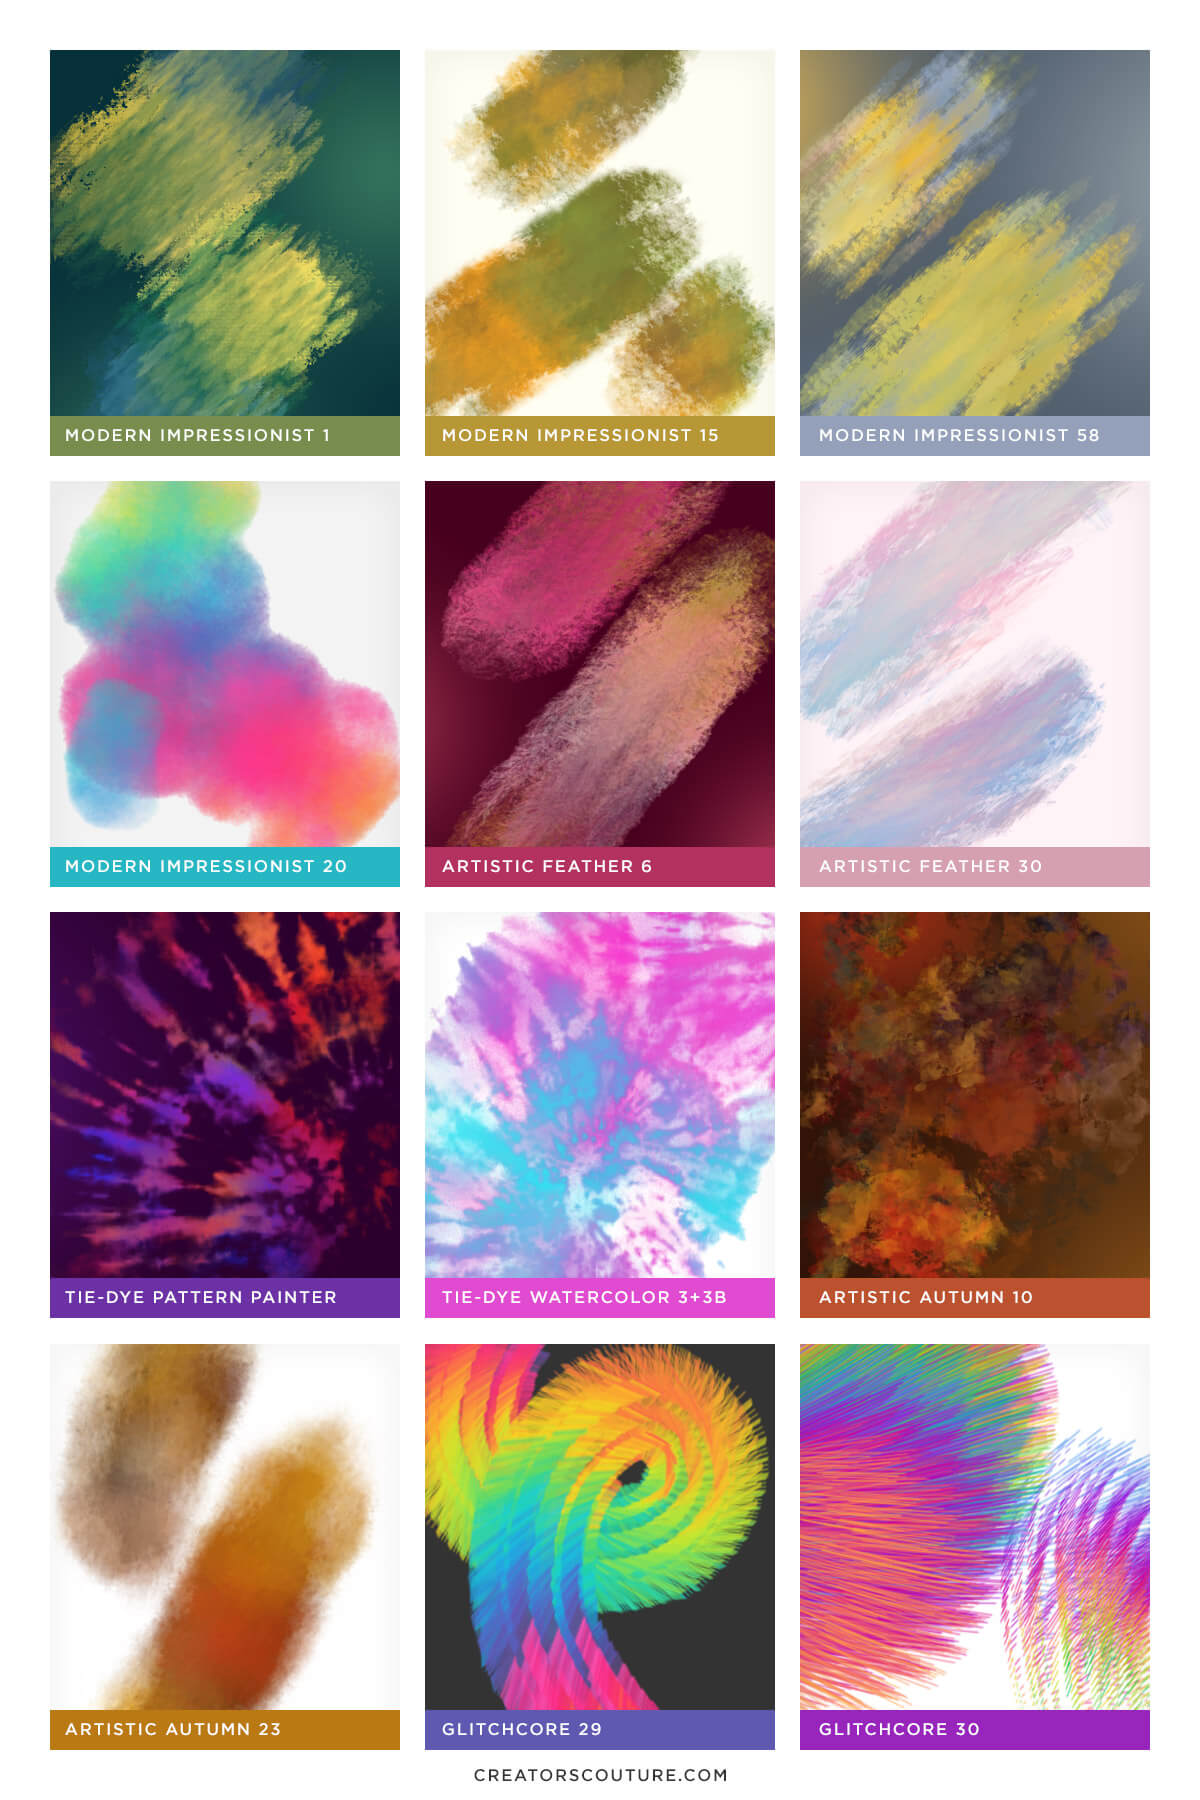 photoshop brush preview images, modern impressionist brushes, artistic feather brushes, tie-dye brushes, artistic autumn, and glitchcore photoshop brushes